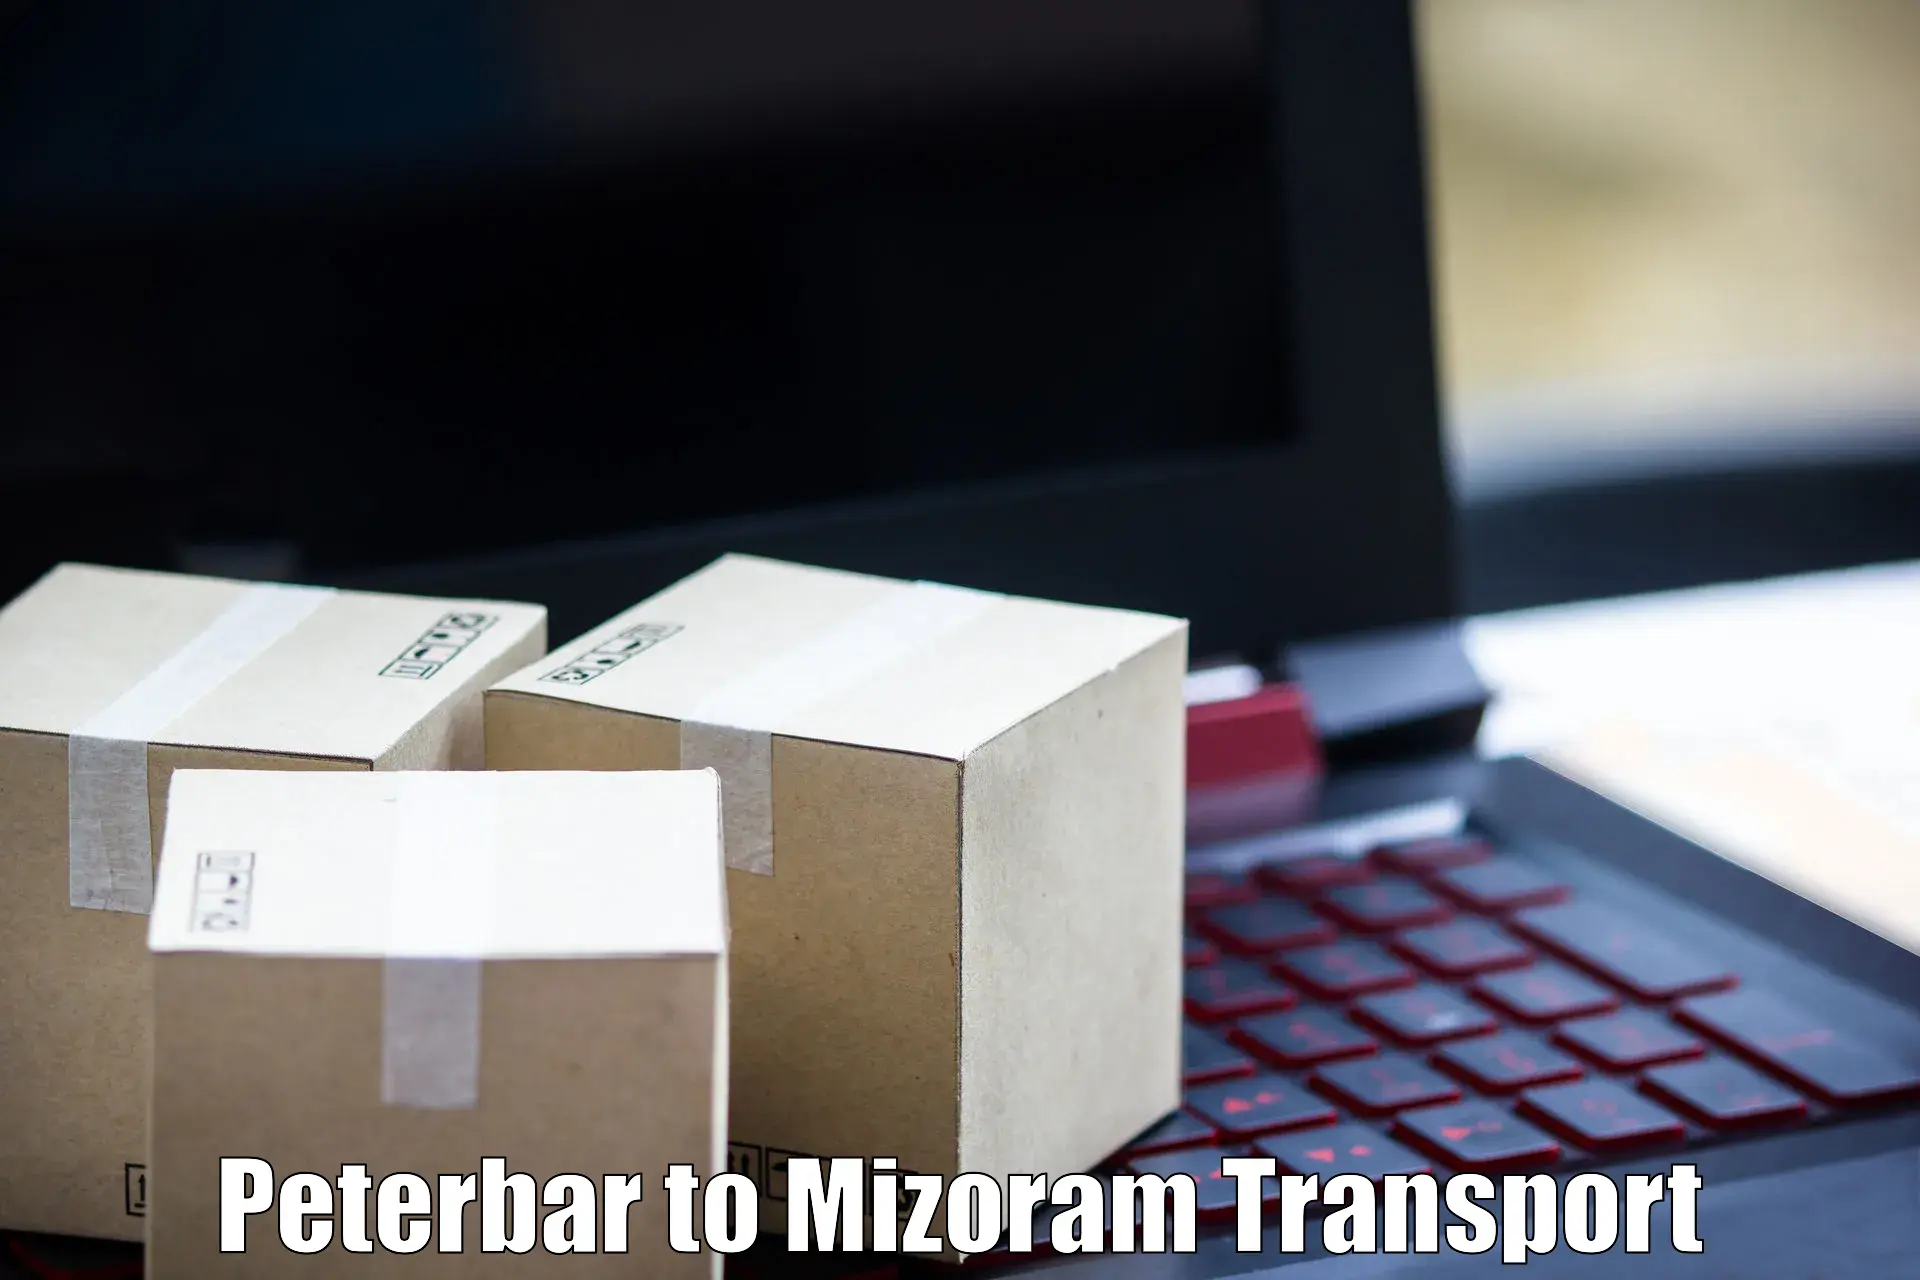 Daily parcel service transport Peterbar to Aizawl